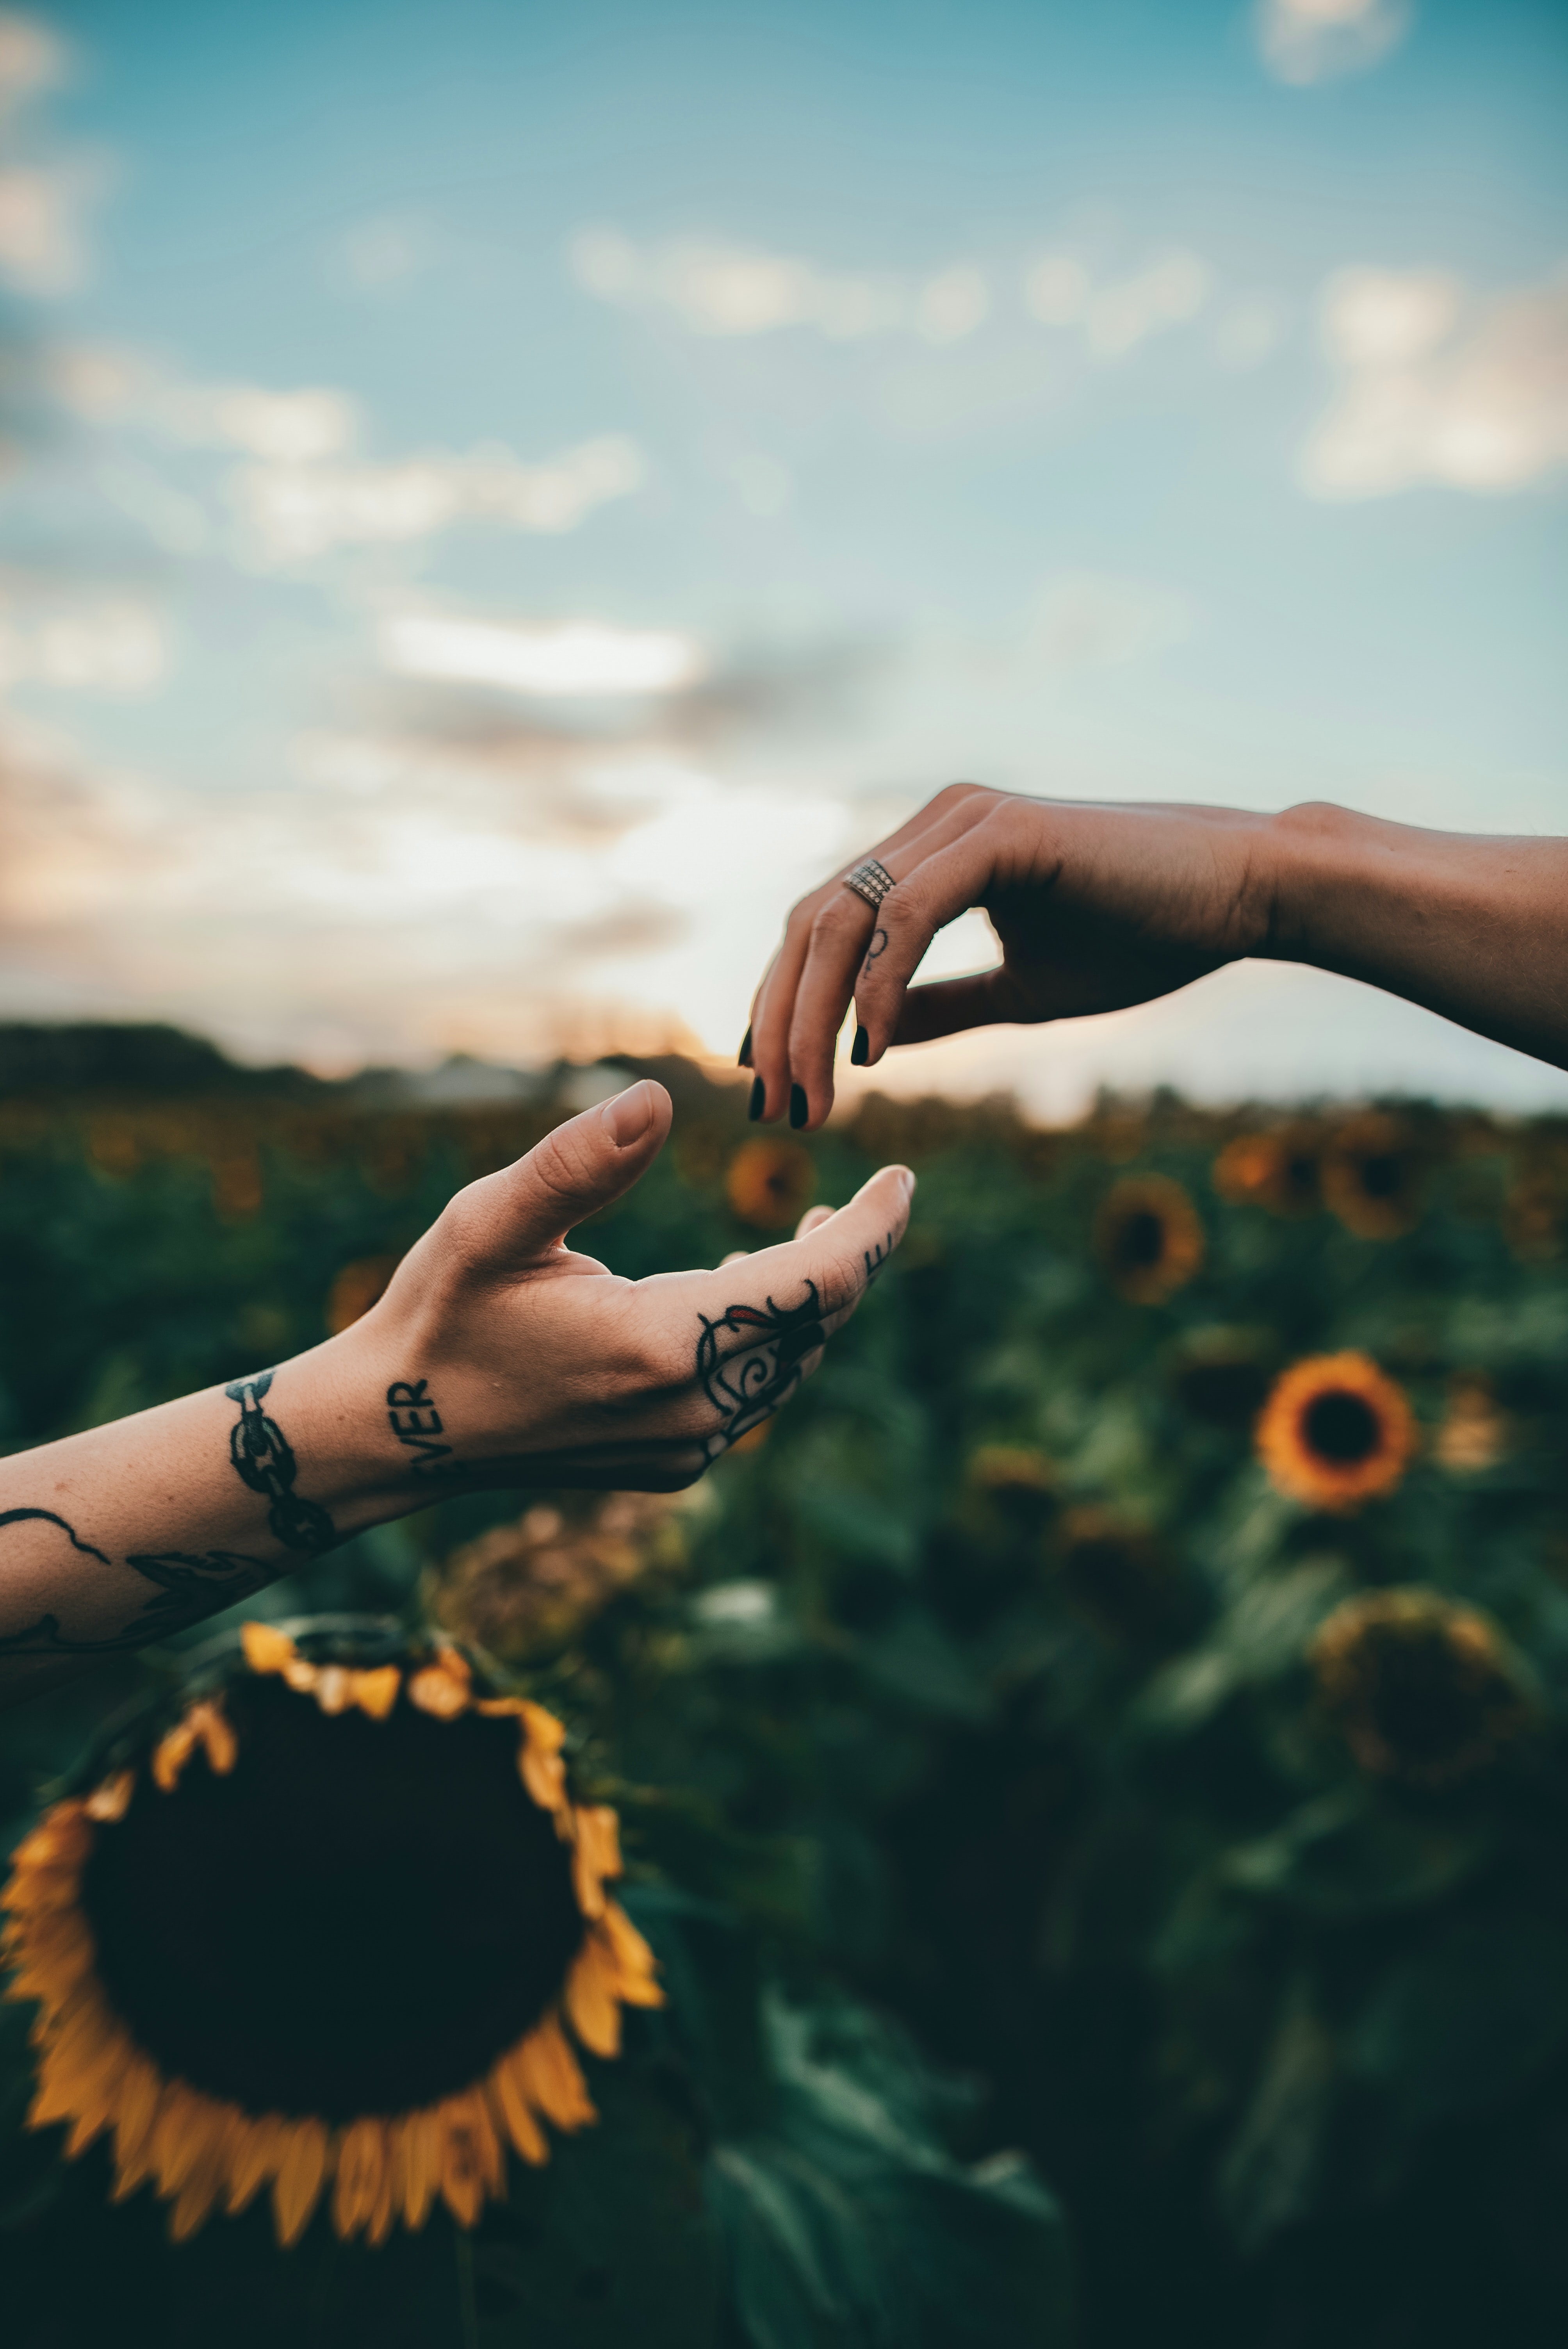 sunflowers, tattoo, tattoos, miscellaneous, touch, miscellanea, hands, touching 32K